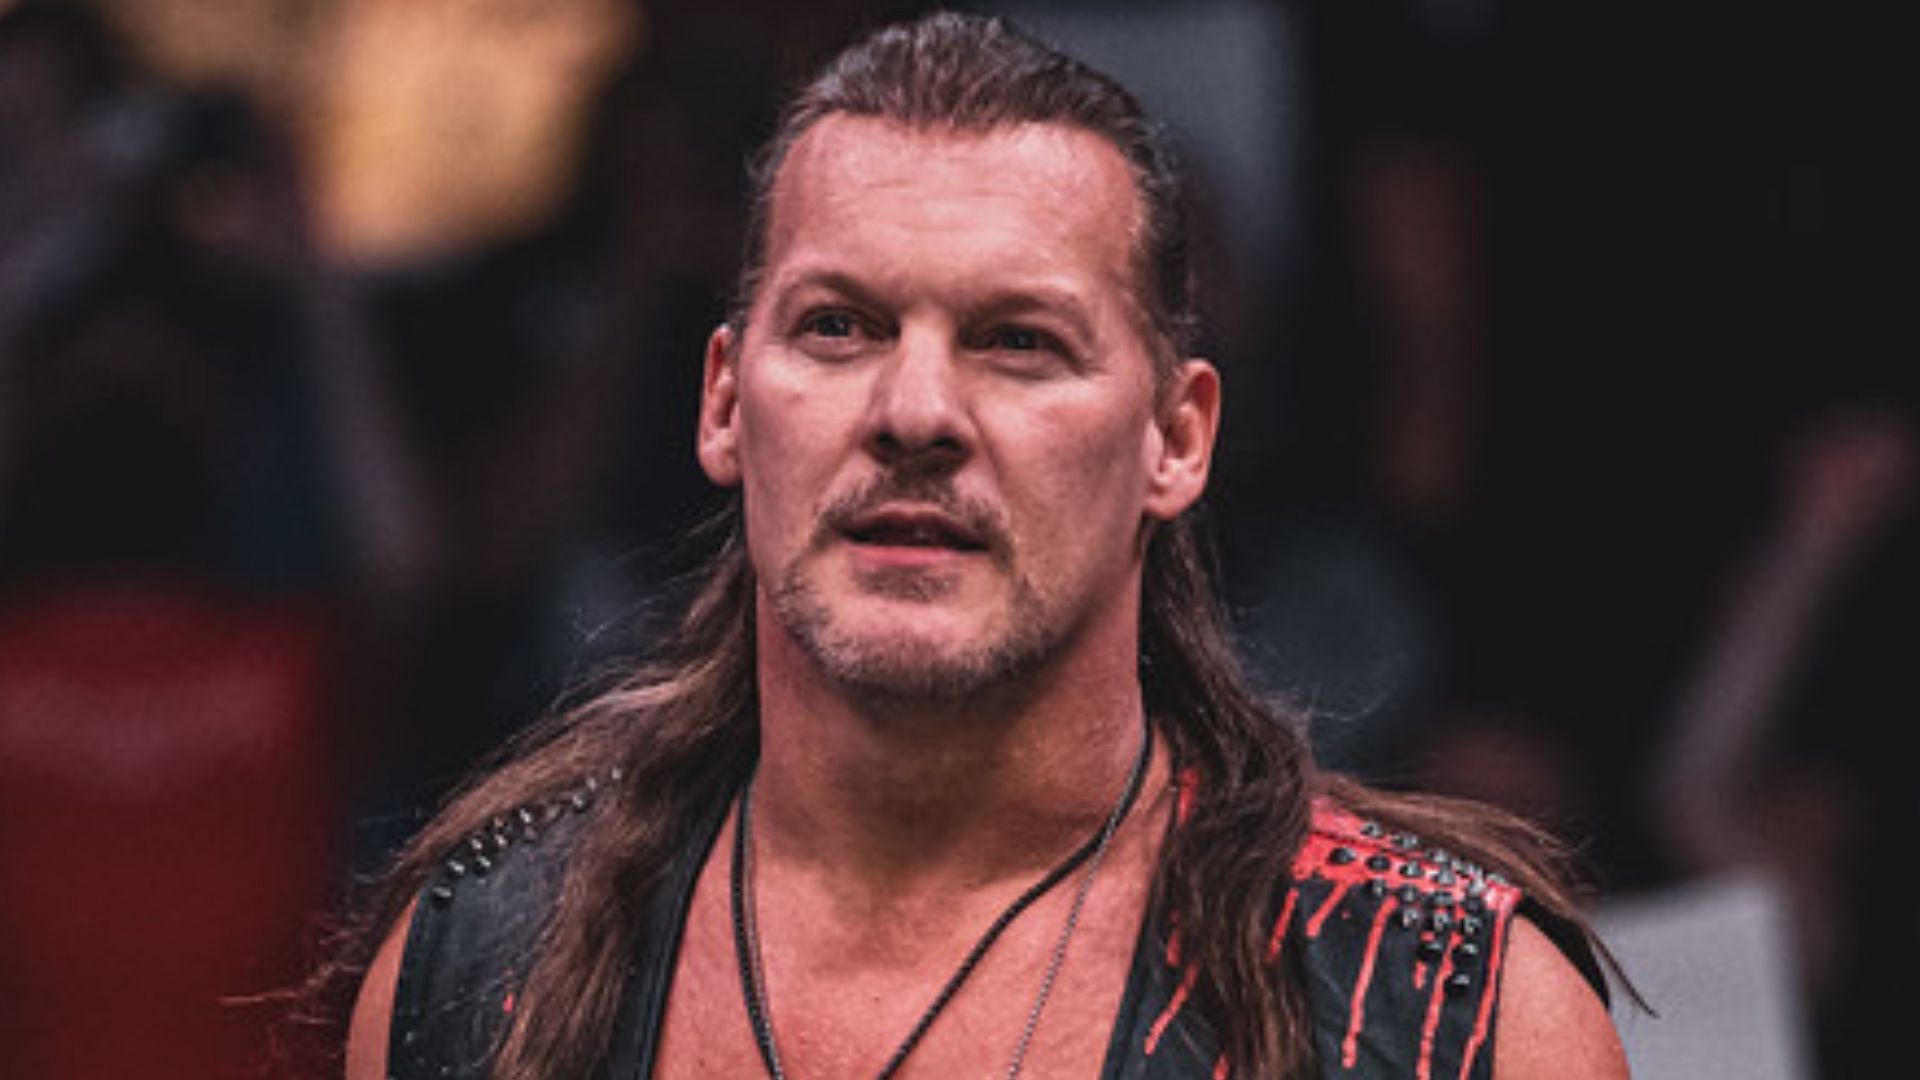 Chris Jericho at an AEW event in 2022 (credit: Jay Lee Photography)